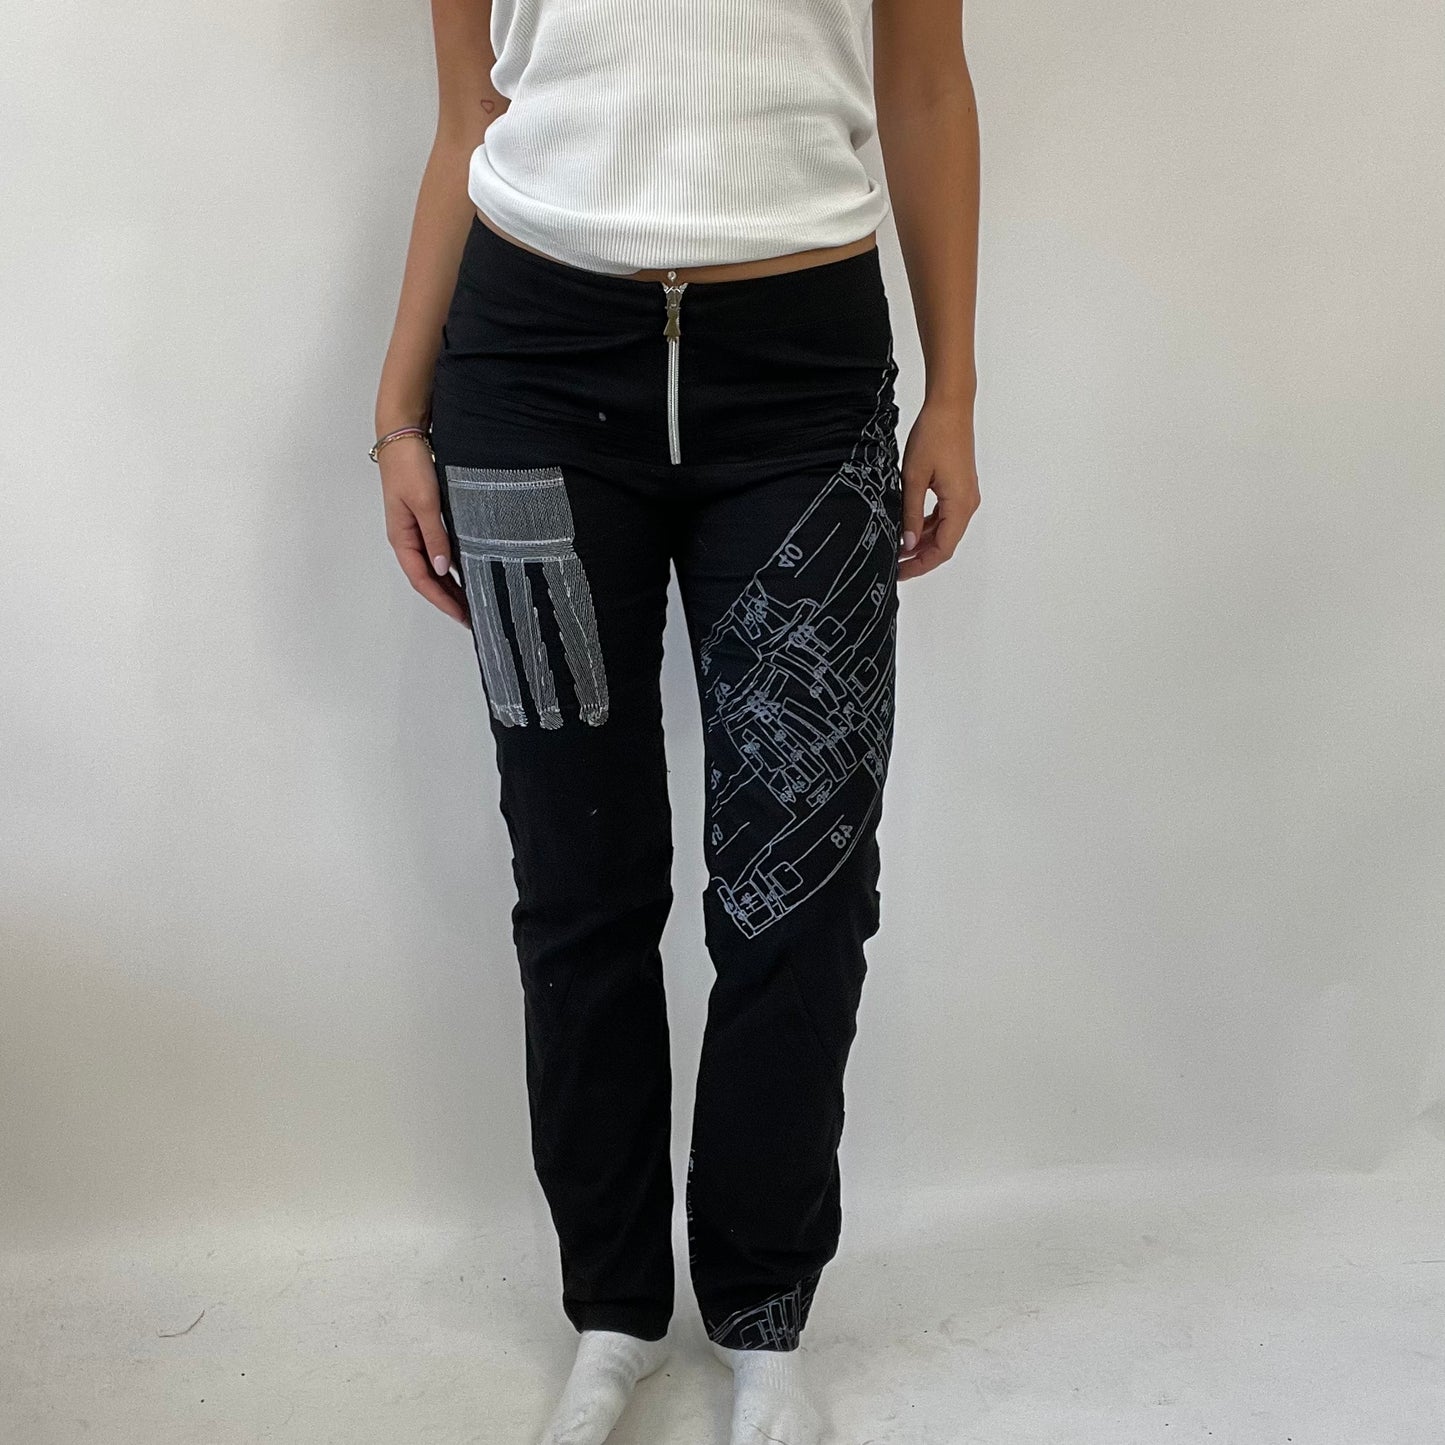 HAILEY BIEBER DROP | small black graphic embroidered trousers